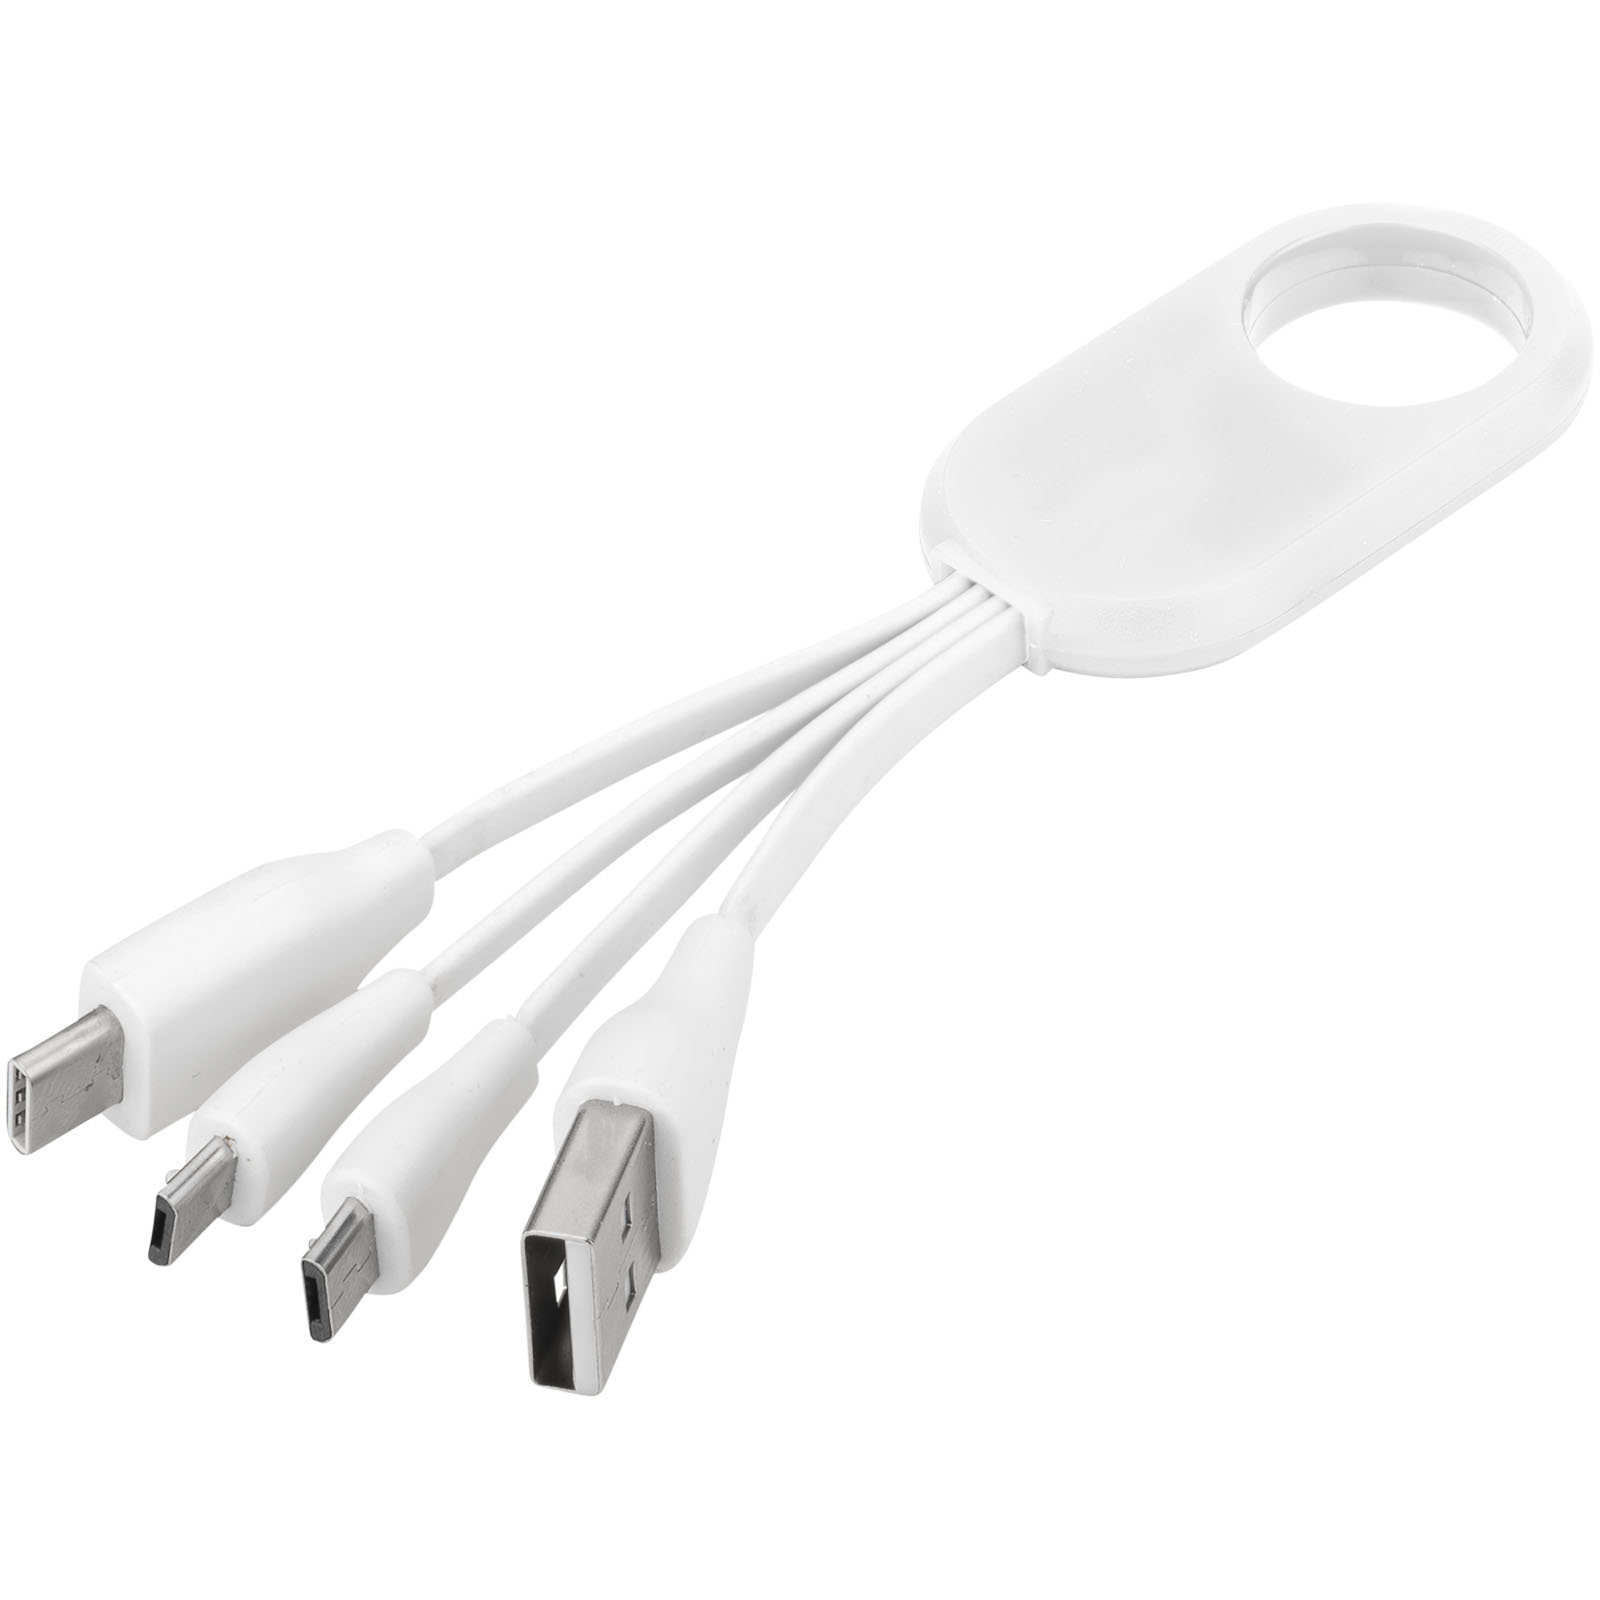 Advertising Cables - Troup 4-in-1 charging cable with type-C tip - 0